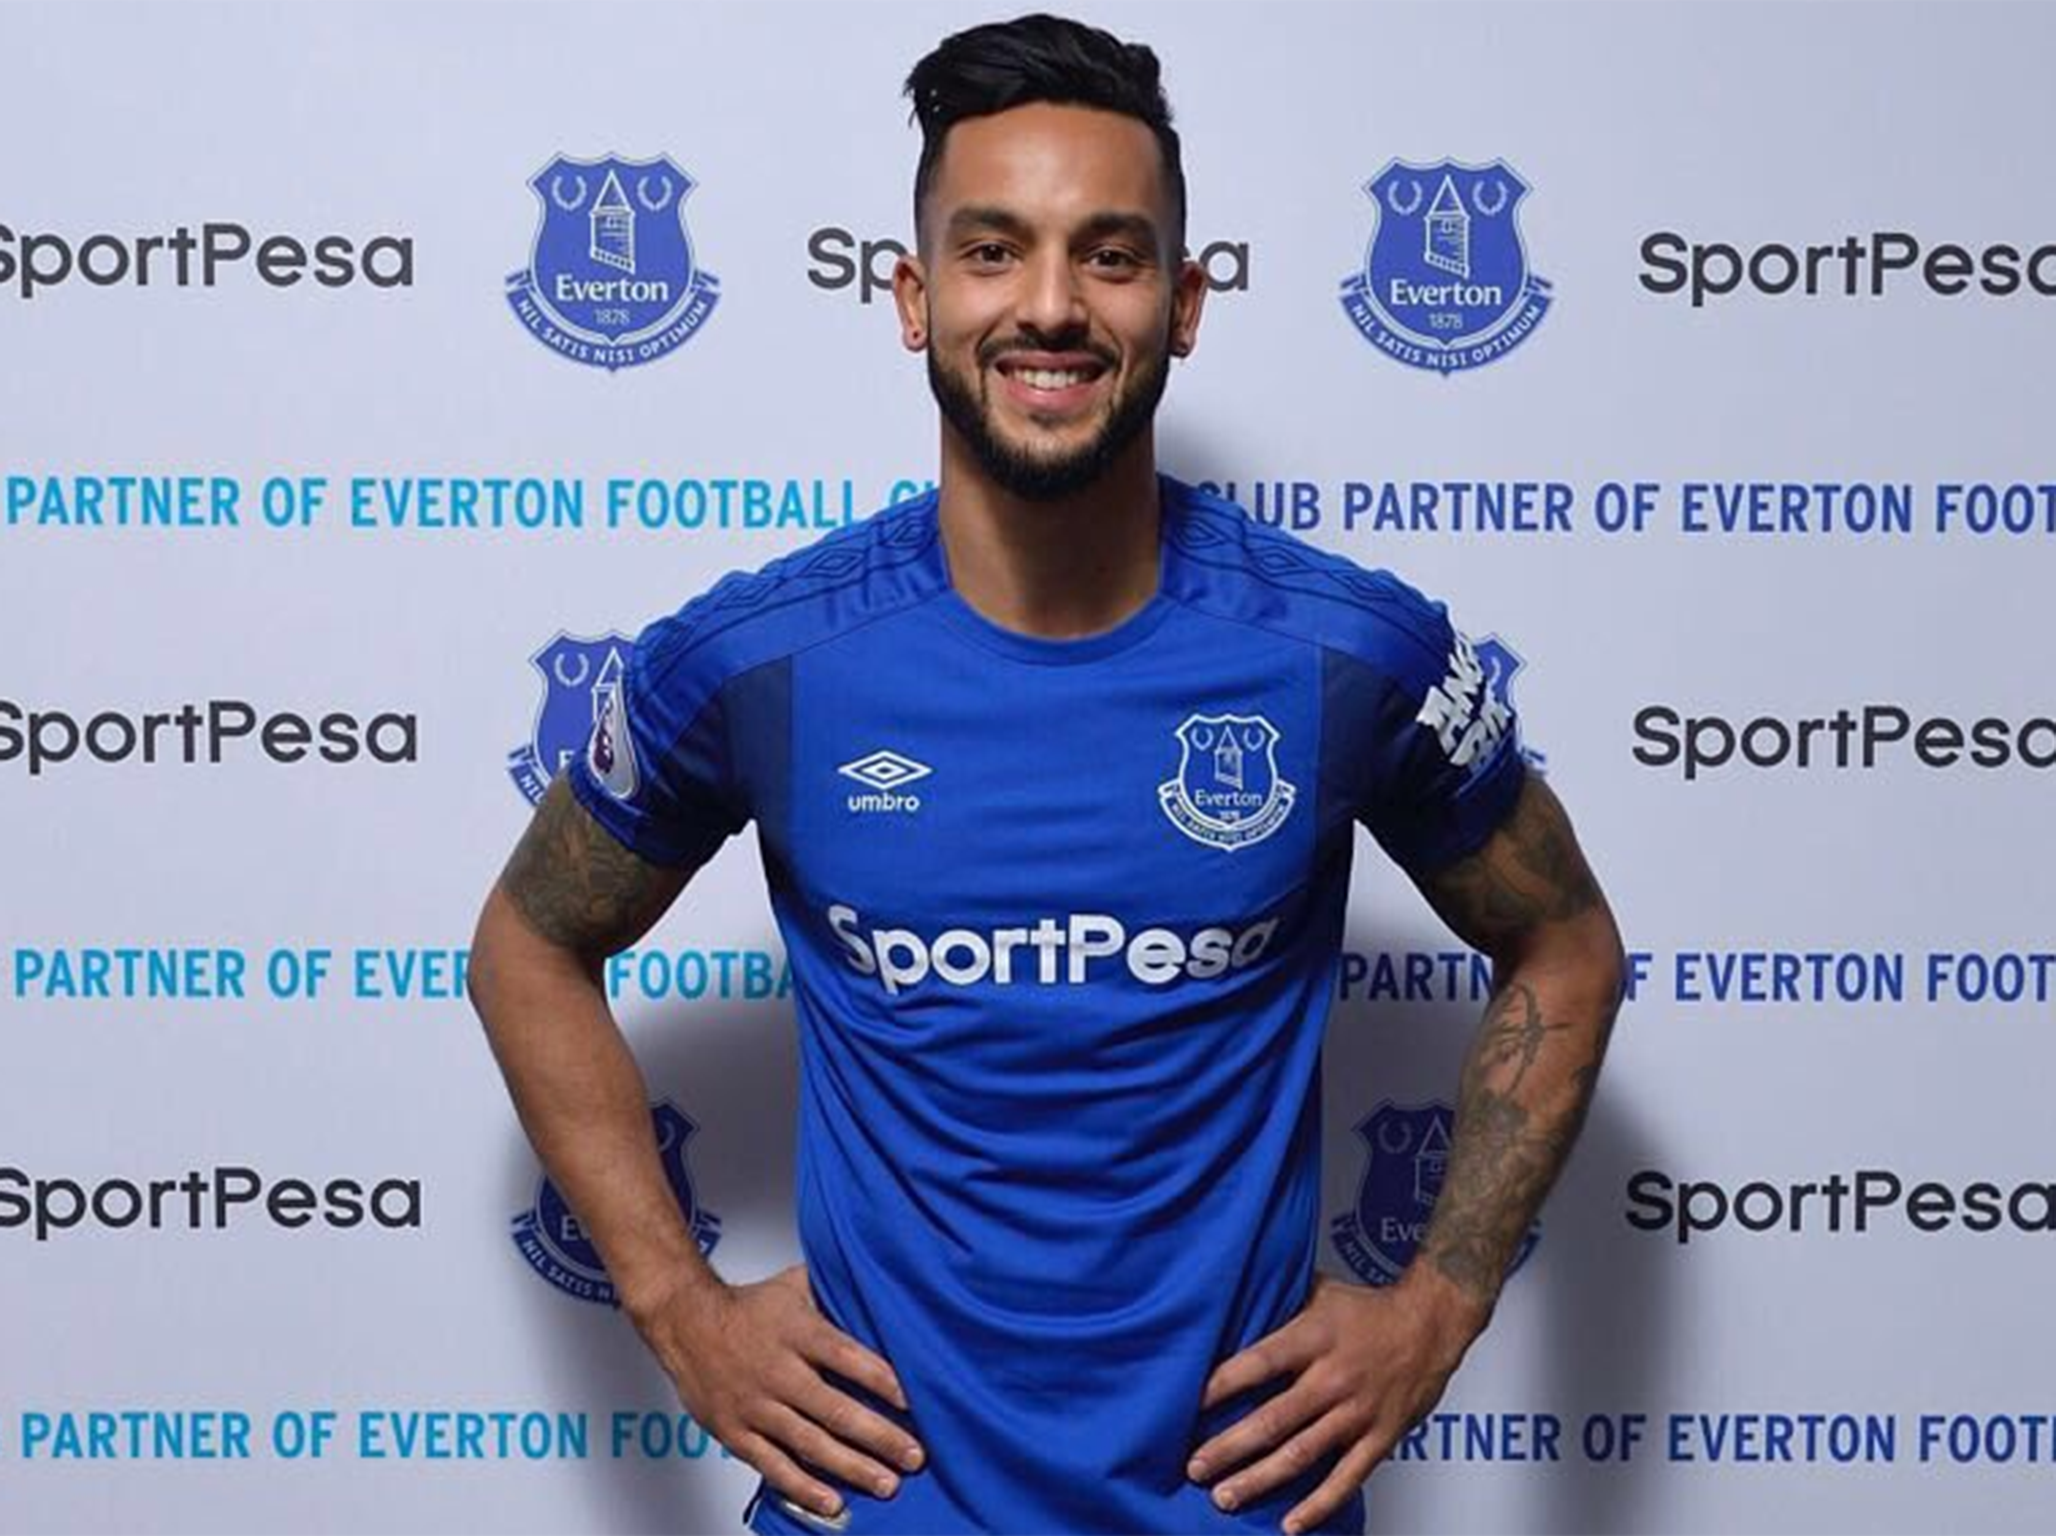 Theo Walcott has signed for Everton after 12 years at Arsenal